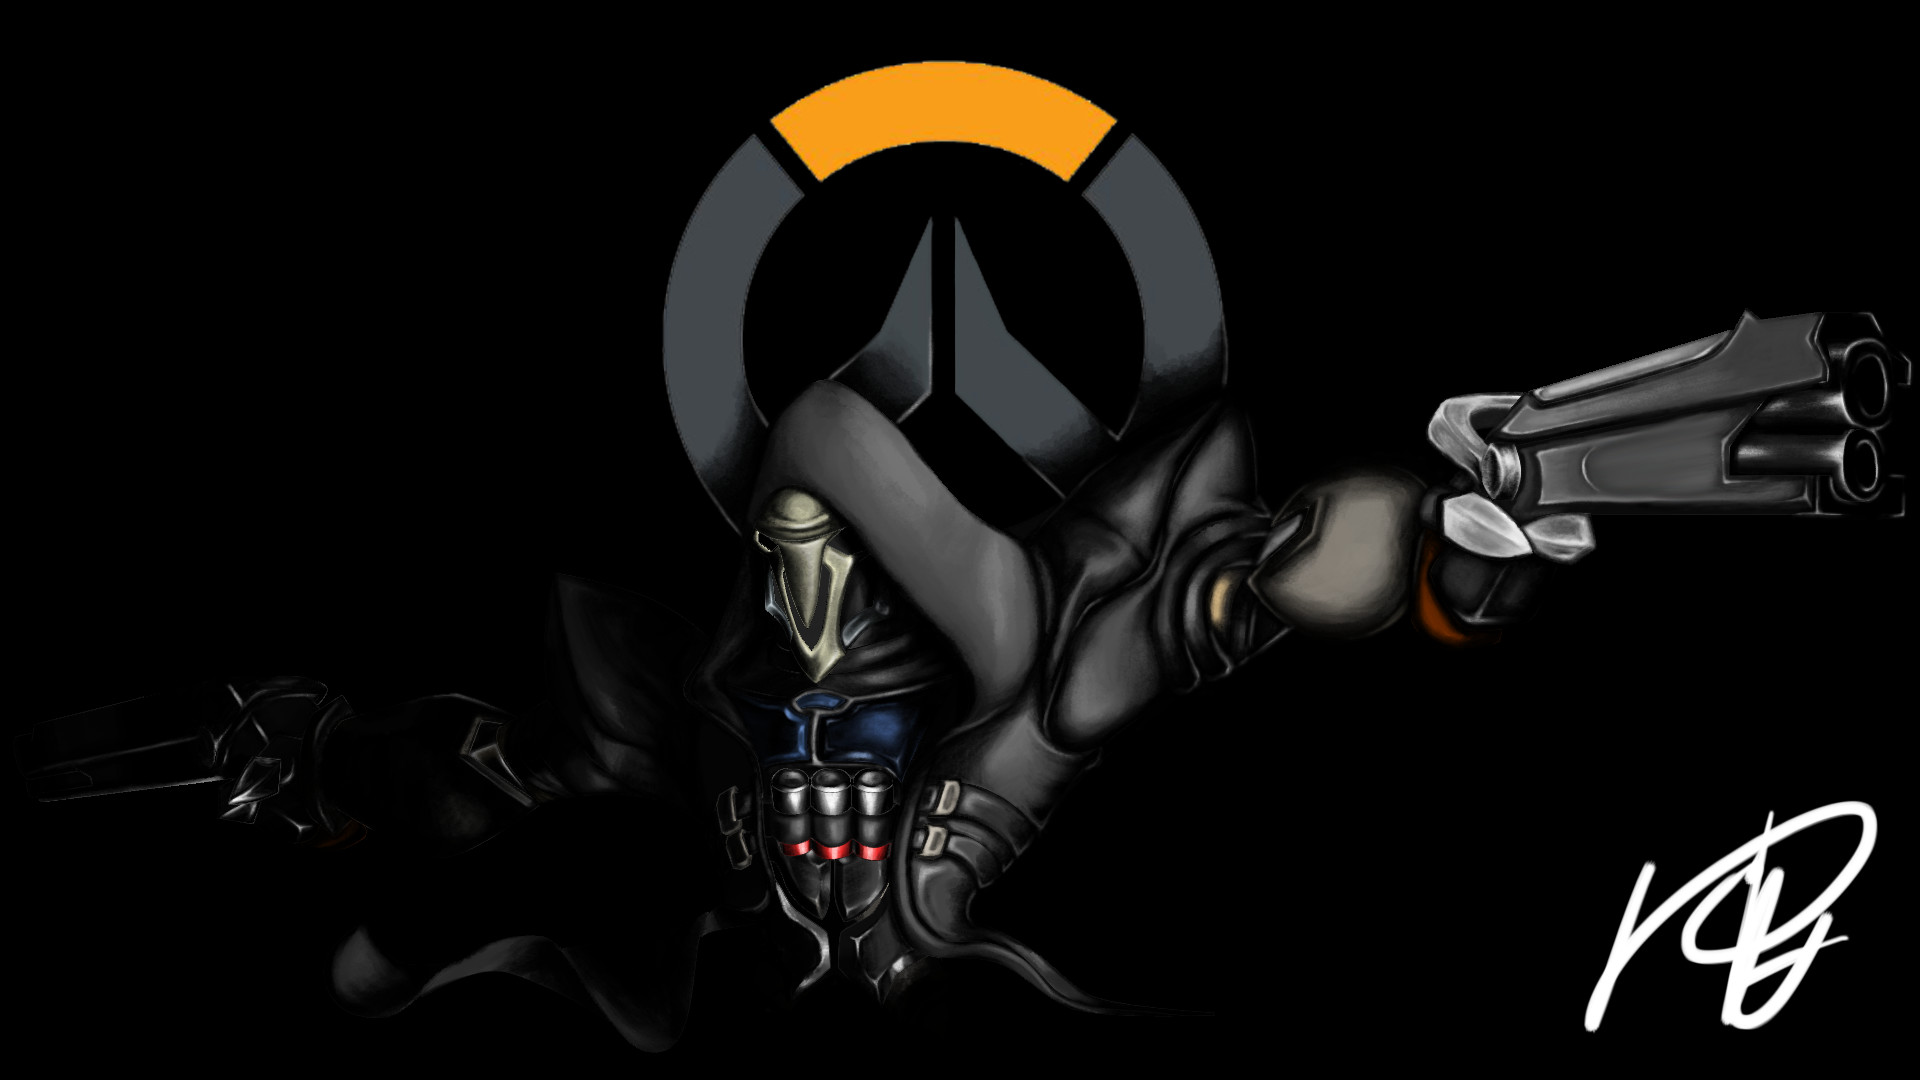 1920x1080 Overwatch - Reaper Wallpaper by Crusader1291 Overwatch - Reaper Wallpaper  by Crusader1291